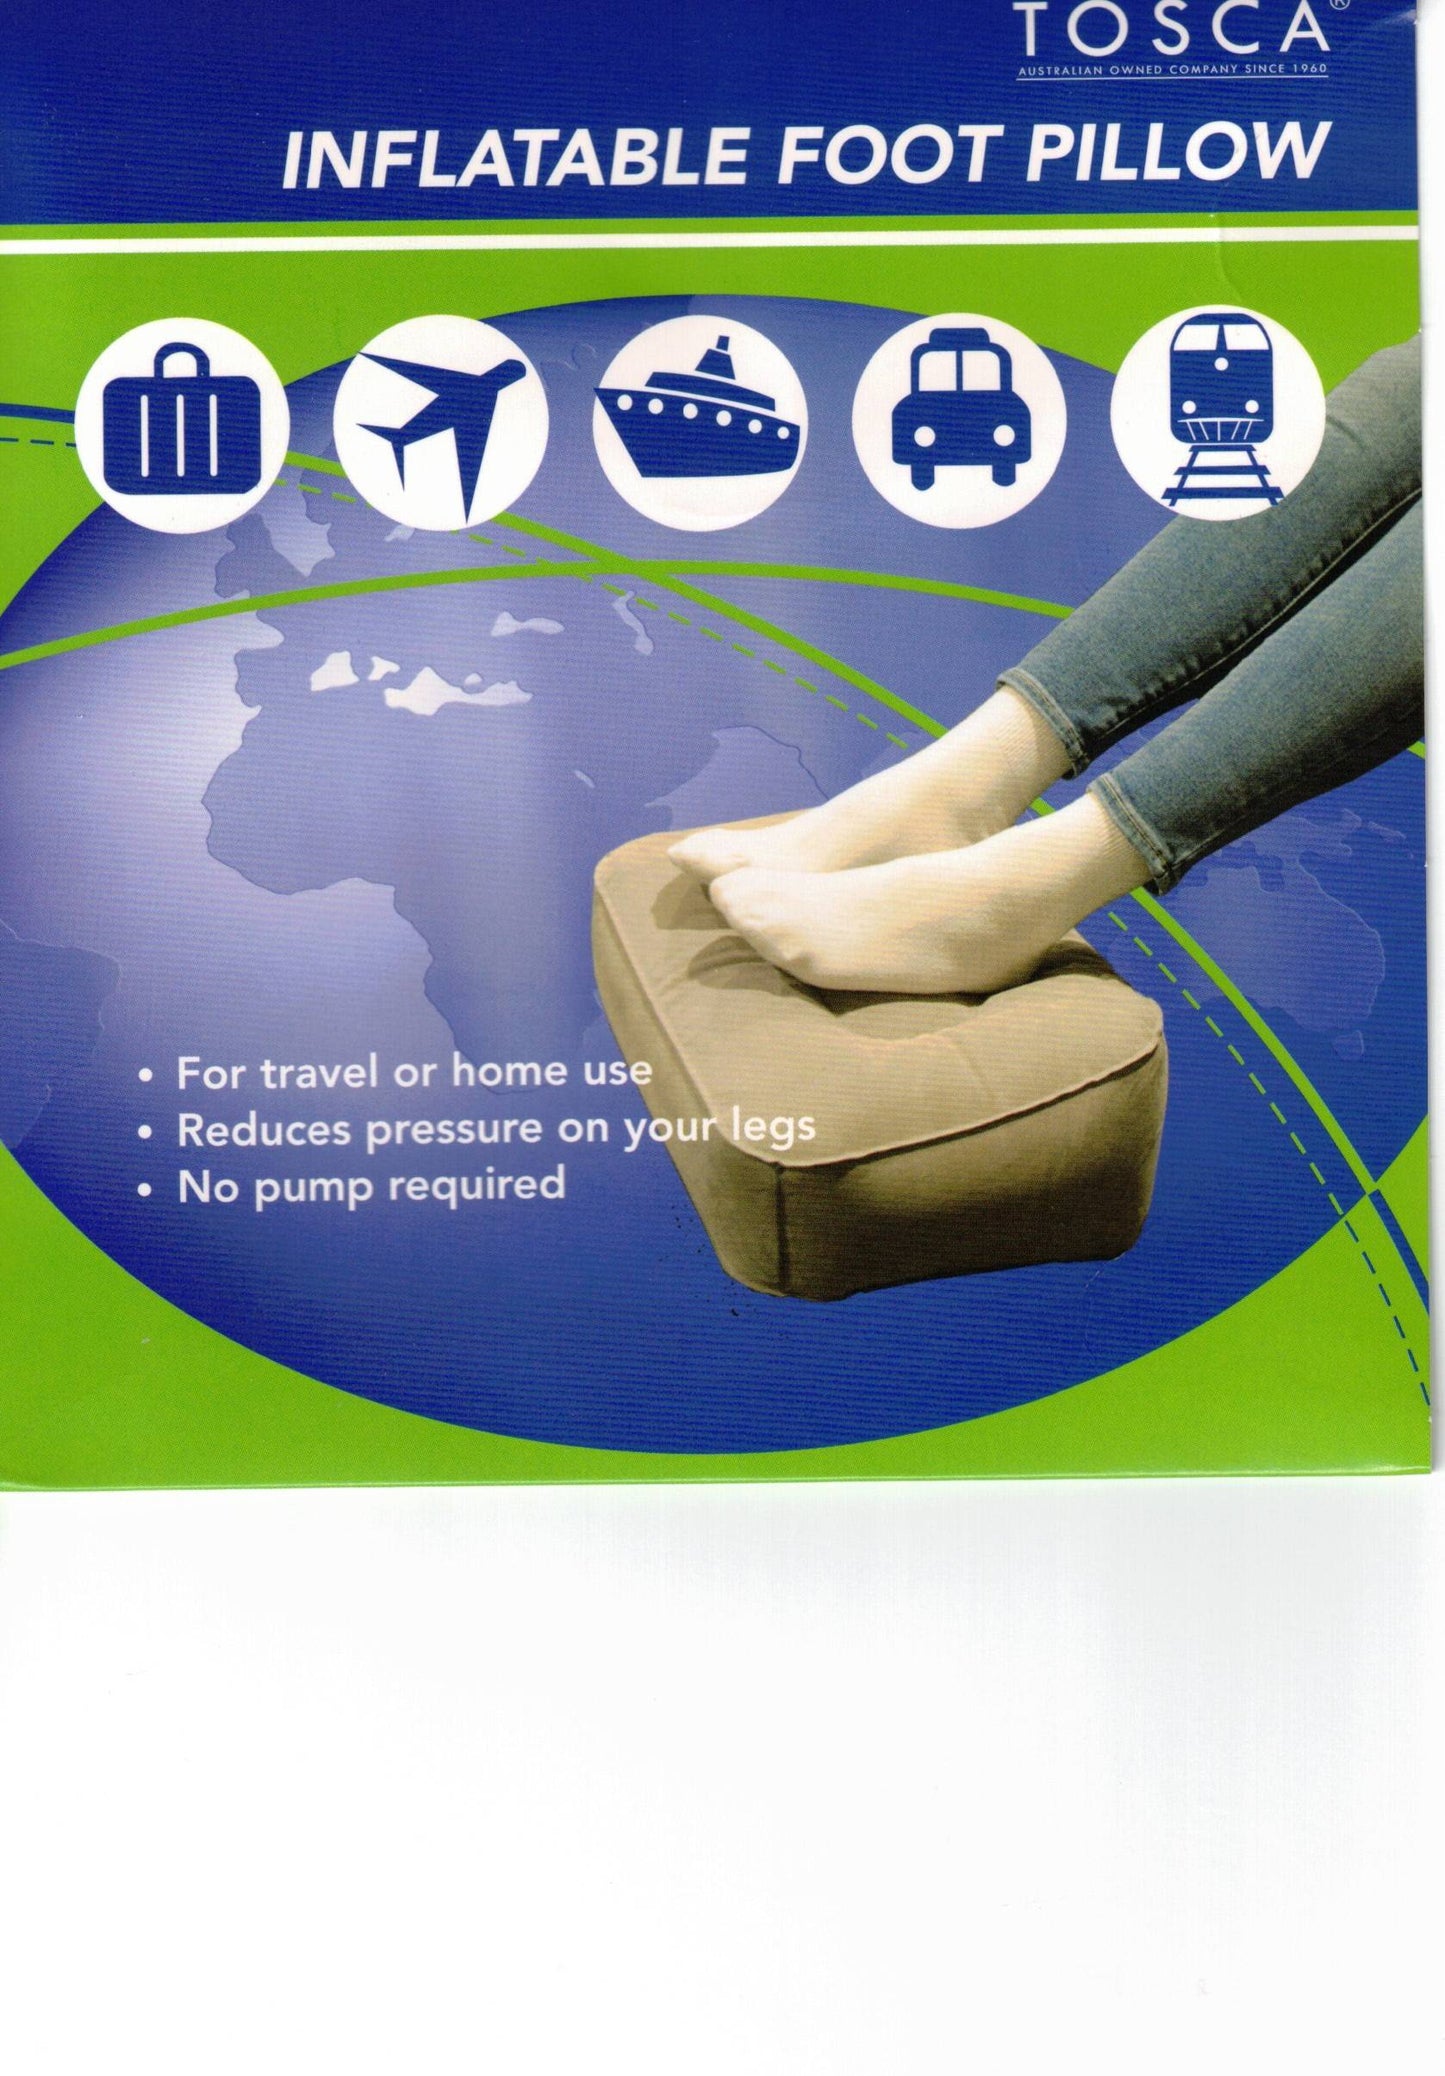 TOSCA INFLATABLE FOOT PILLOW